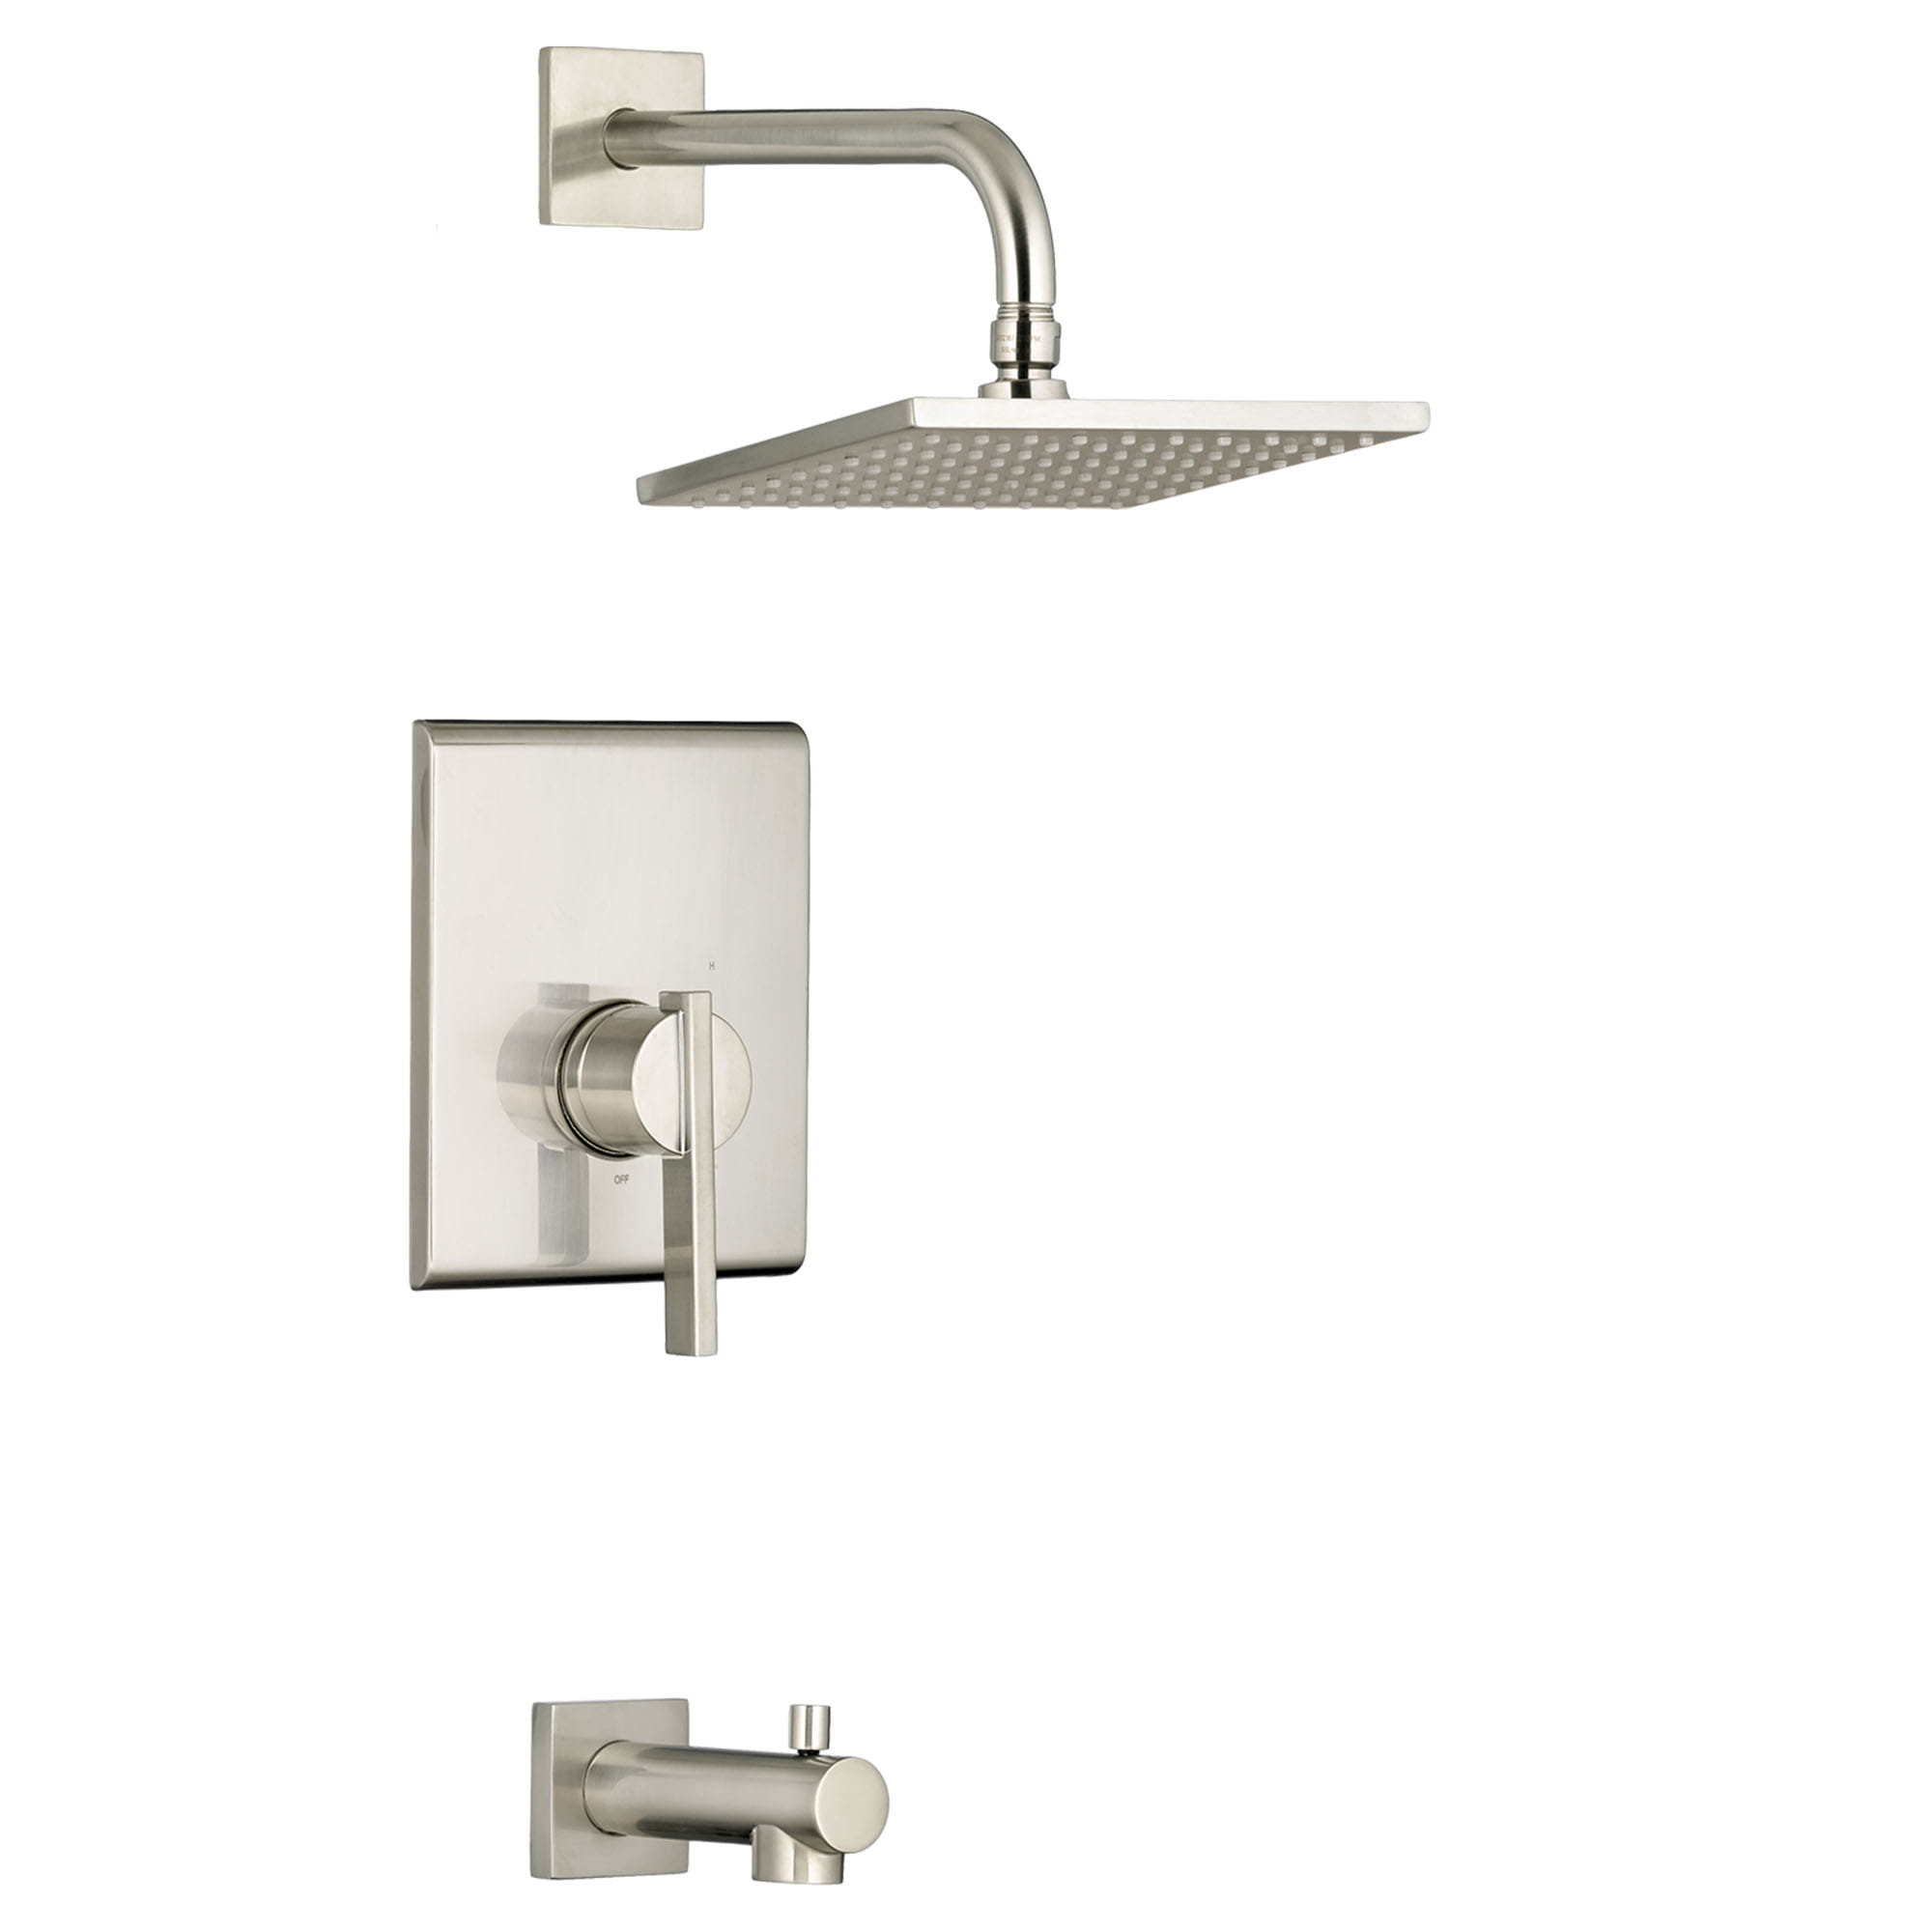 Times Square 25 gpm 95 L min Tub and Shower Trim Kit With Rain Showerhead Double Ceramic Pressure Balance Cartridge With Lever Handle   BRUSHED NICKEL